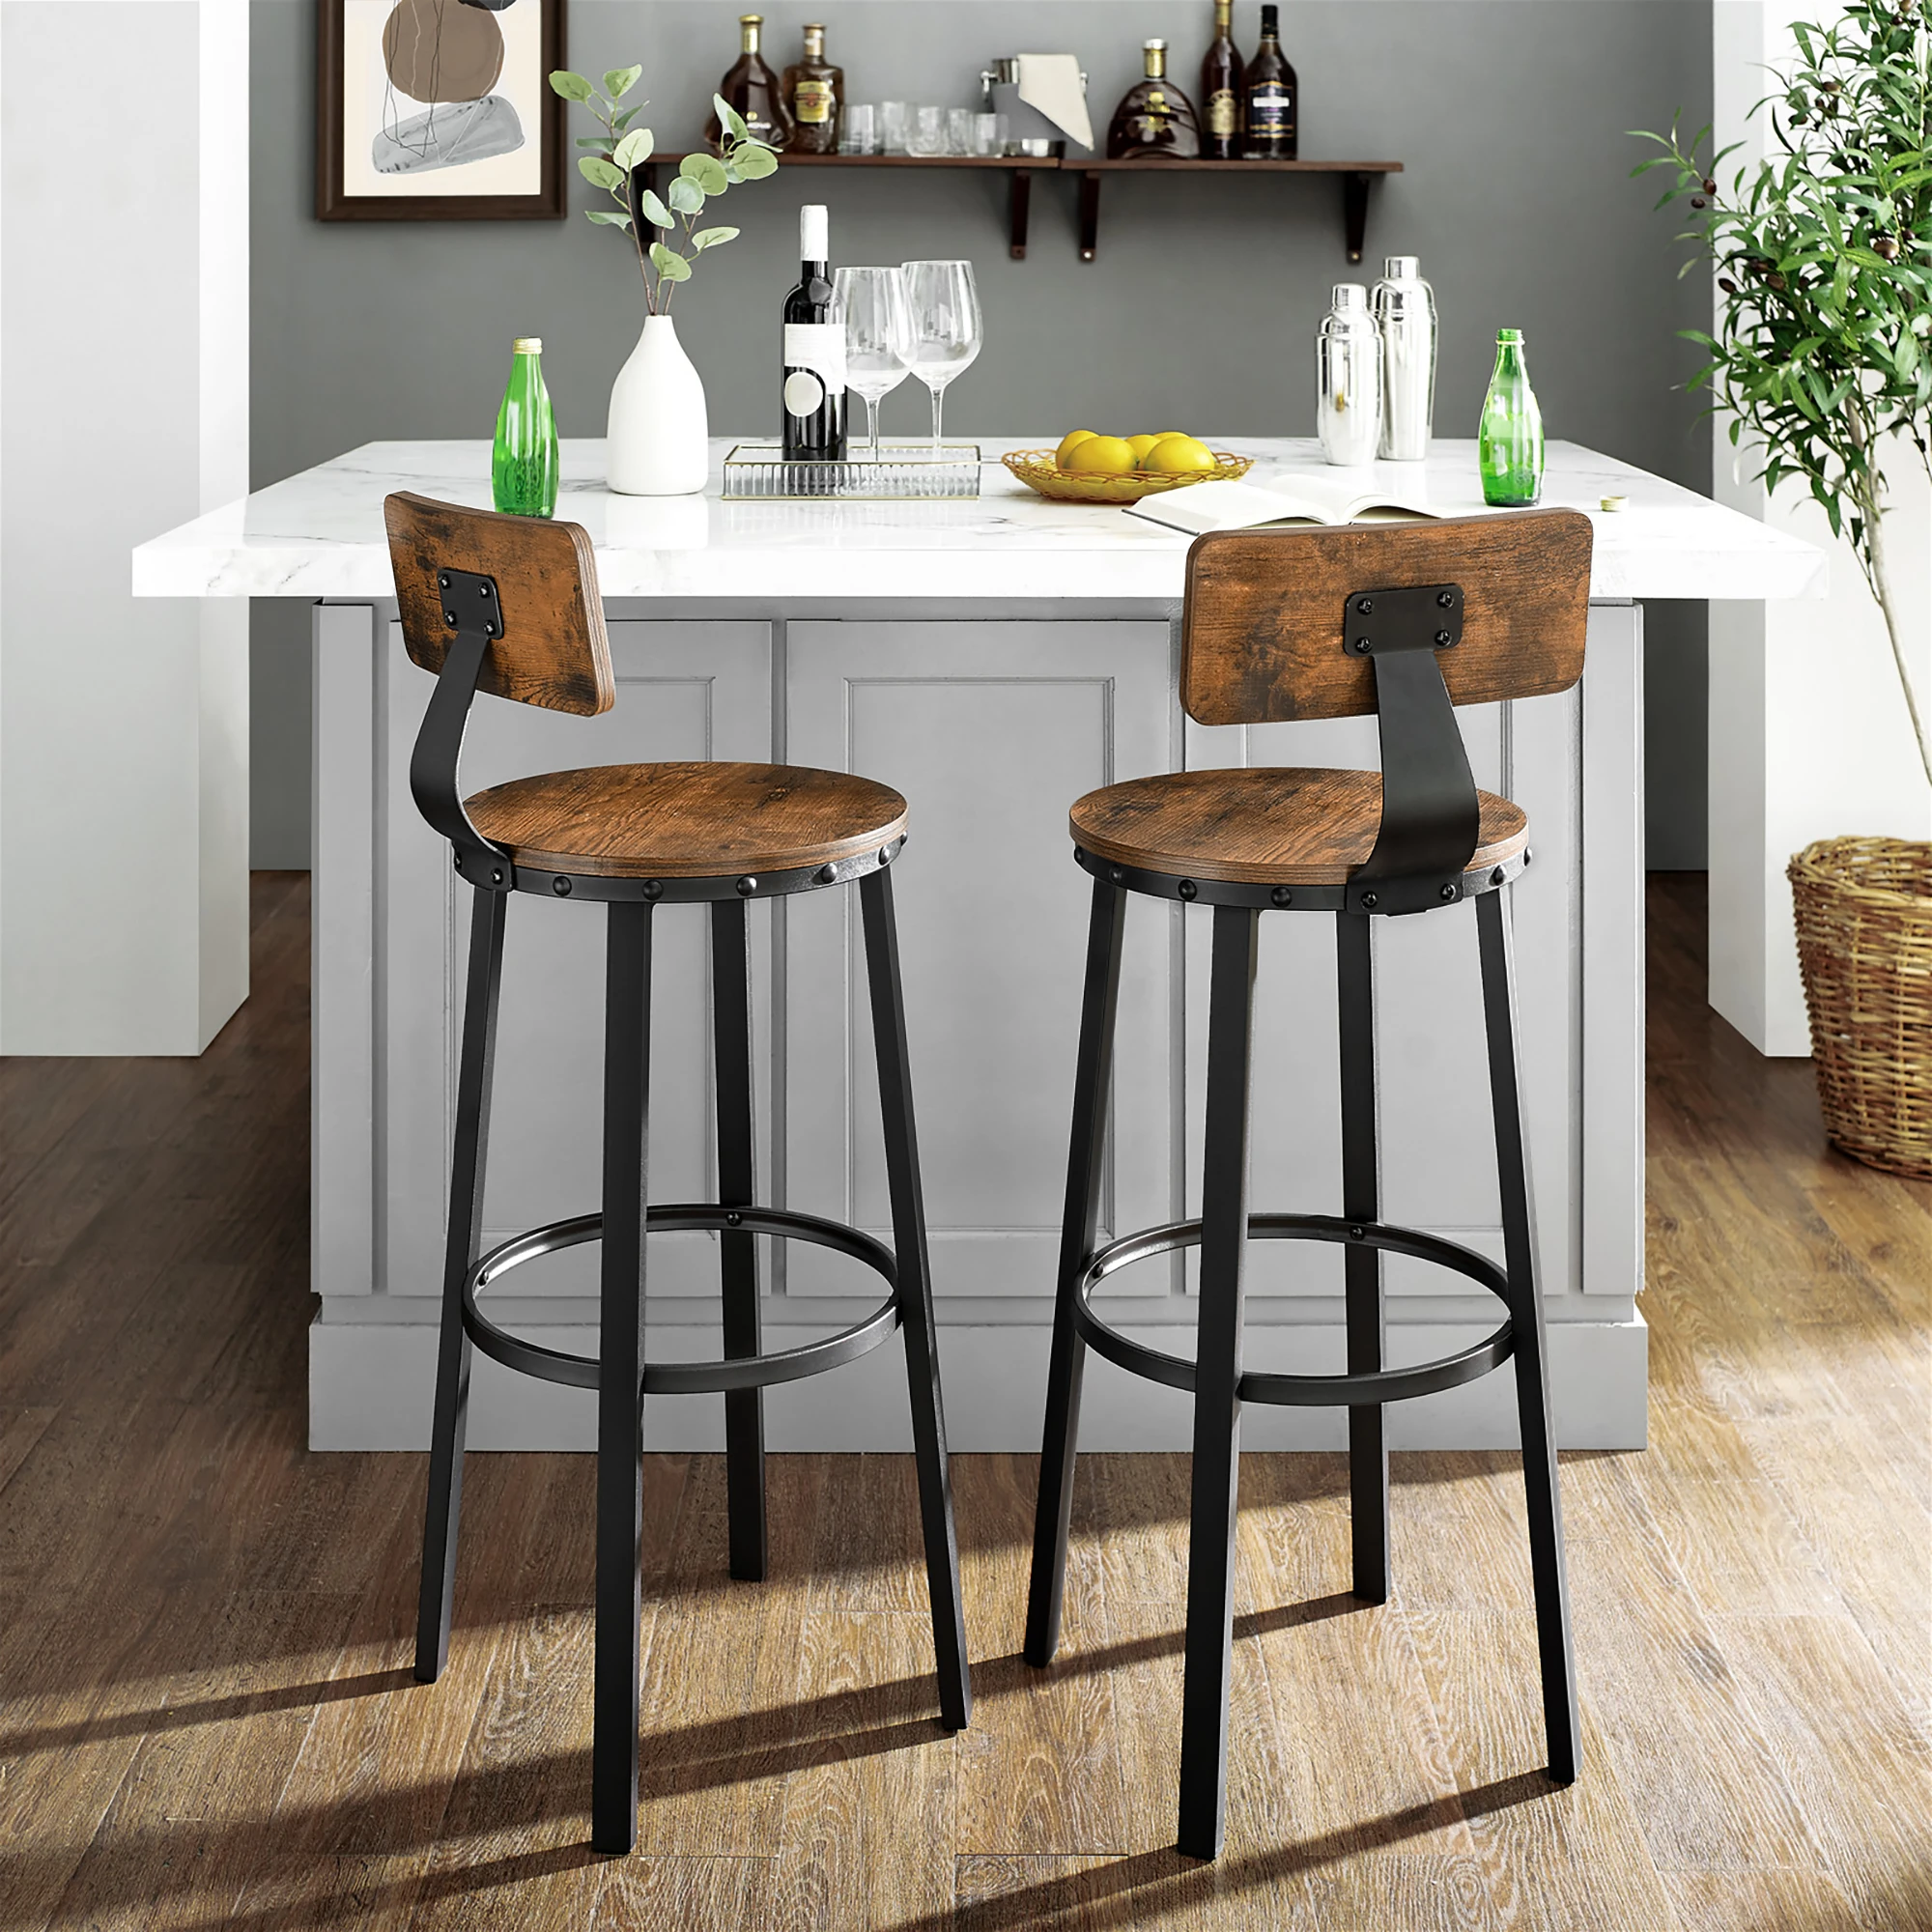 
Wholesale Bar Chairs Iron Tall table Antique Industrial Vintage Kitchen Swivel Wooden Cheap High Stool Bar Chairs  (1600230427425)